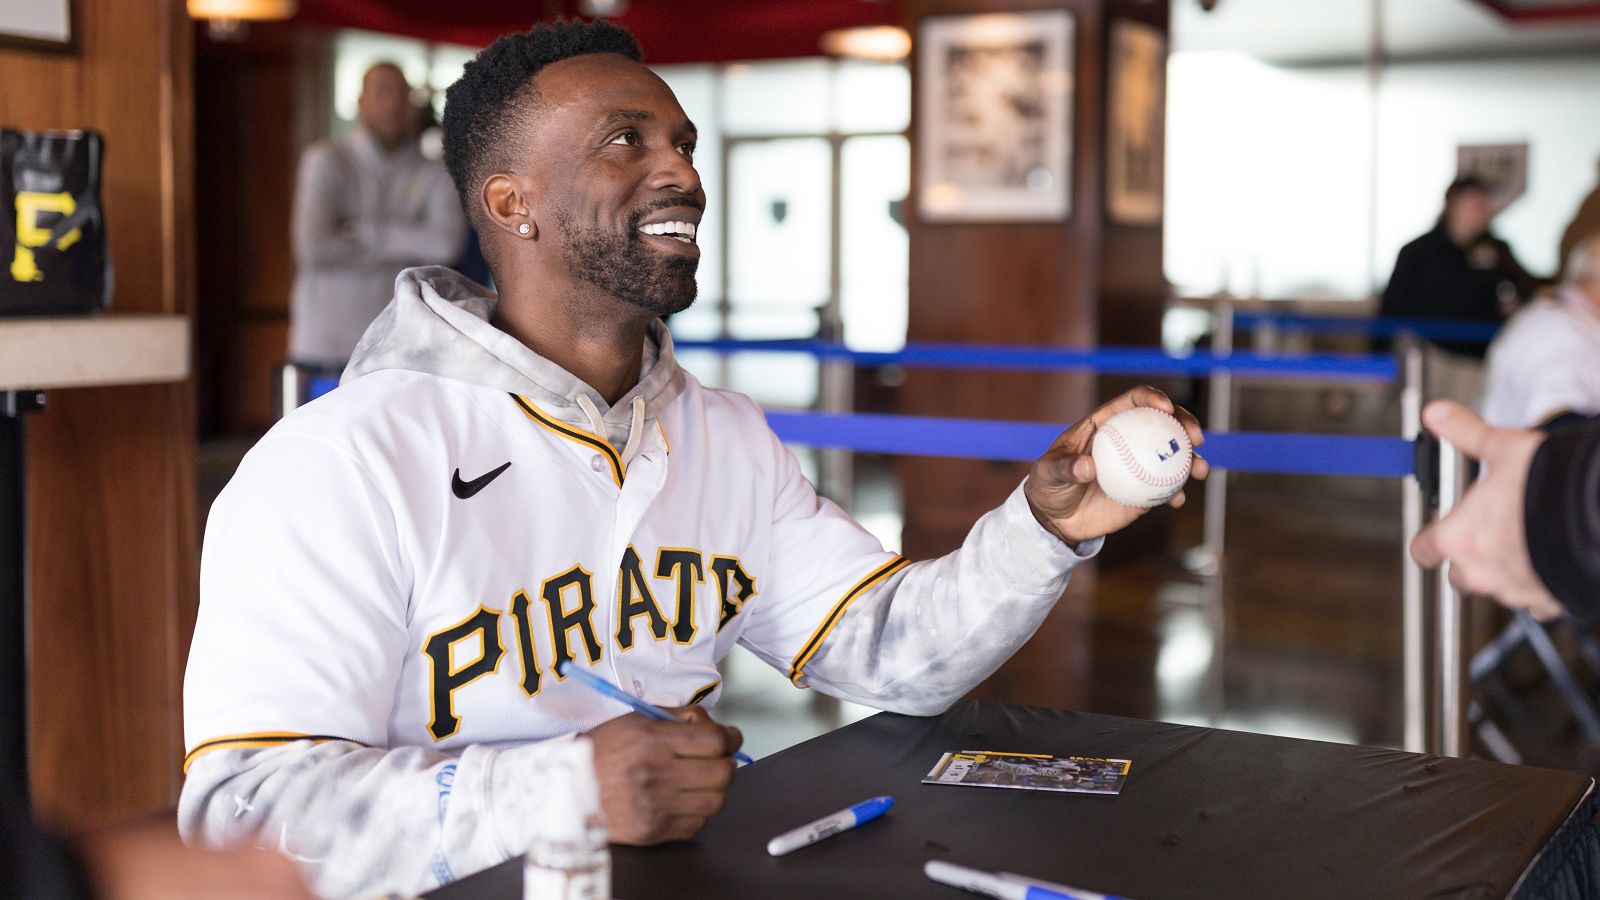 Andrew McCutchen on reconnecting with fans, his legacy and why he